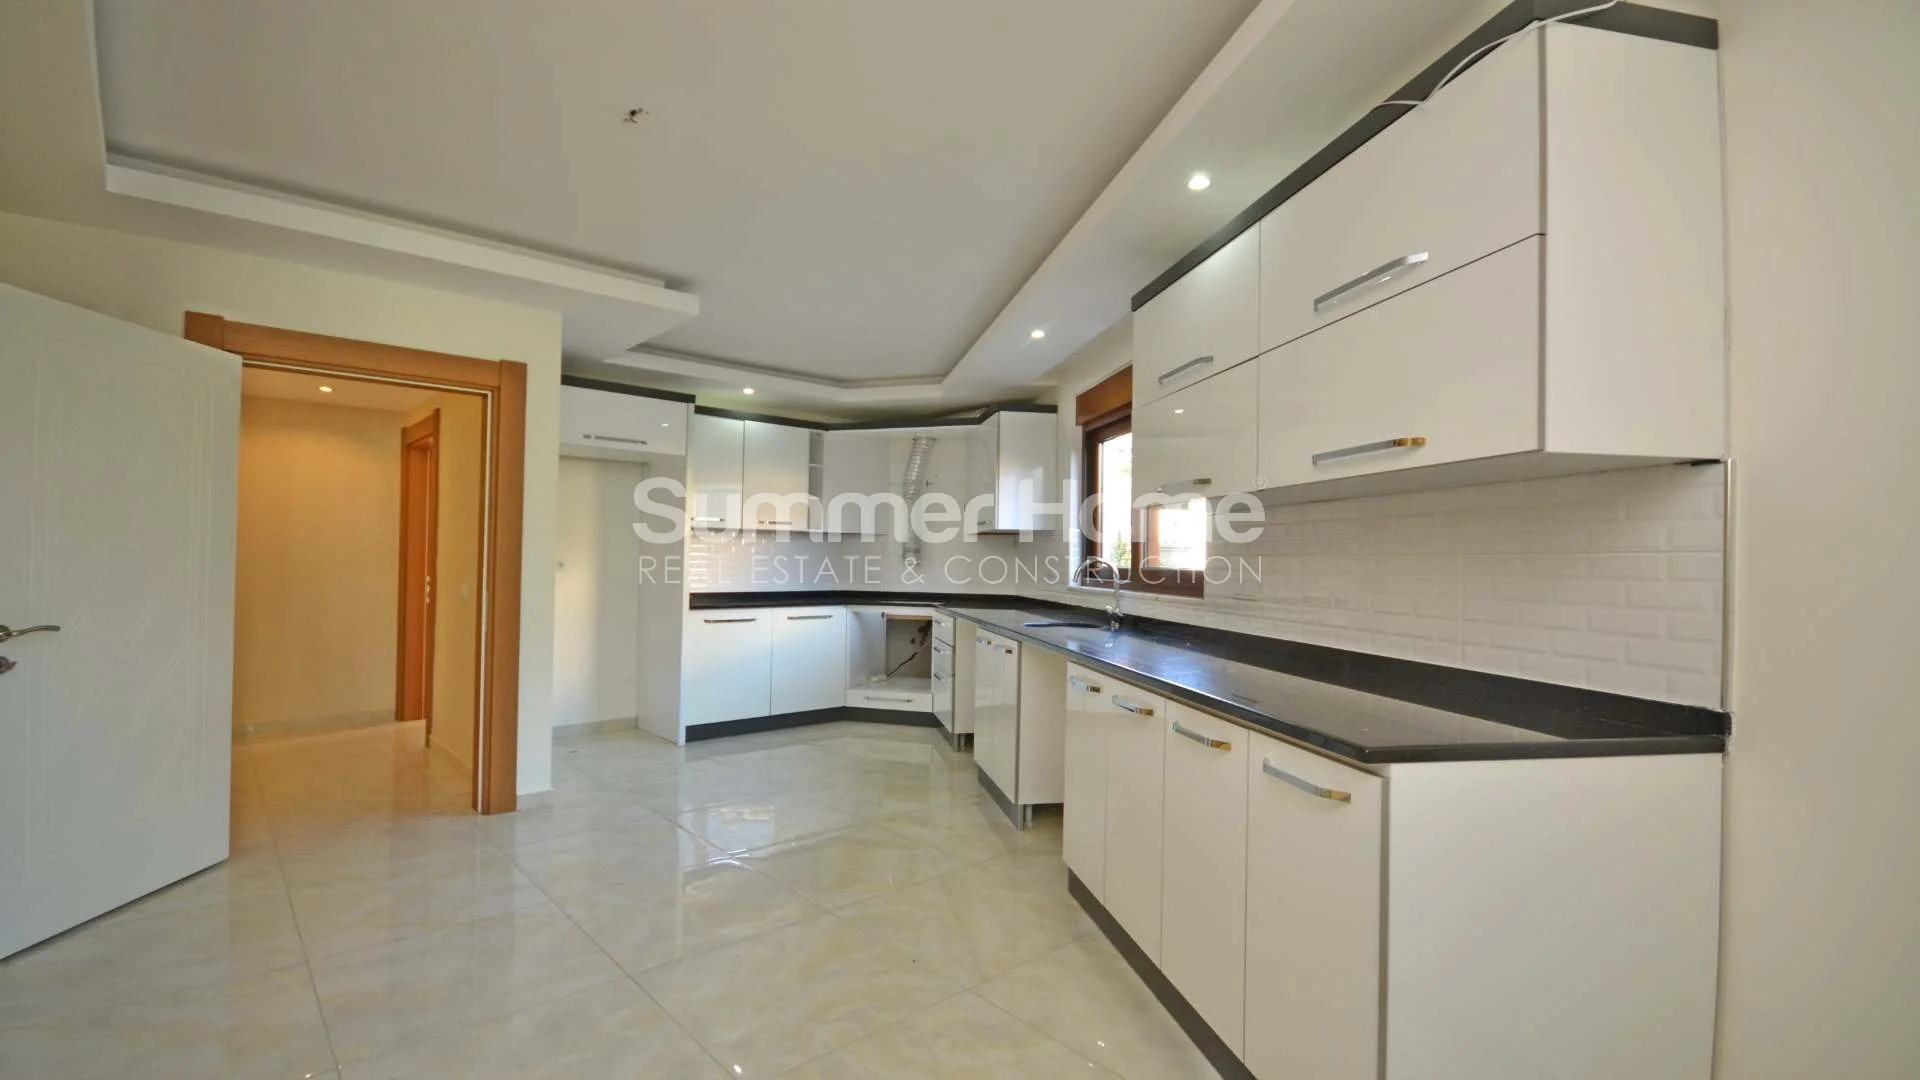 For sale Apartment Alanya Hasbahce Interior - 15